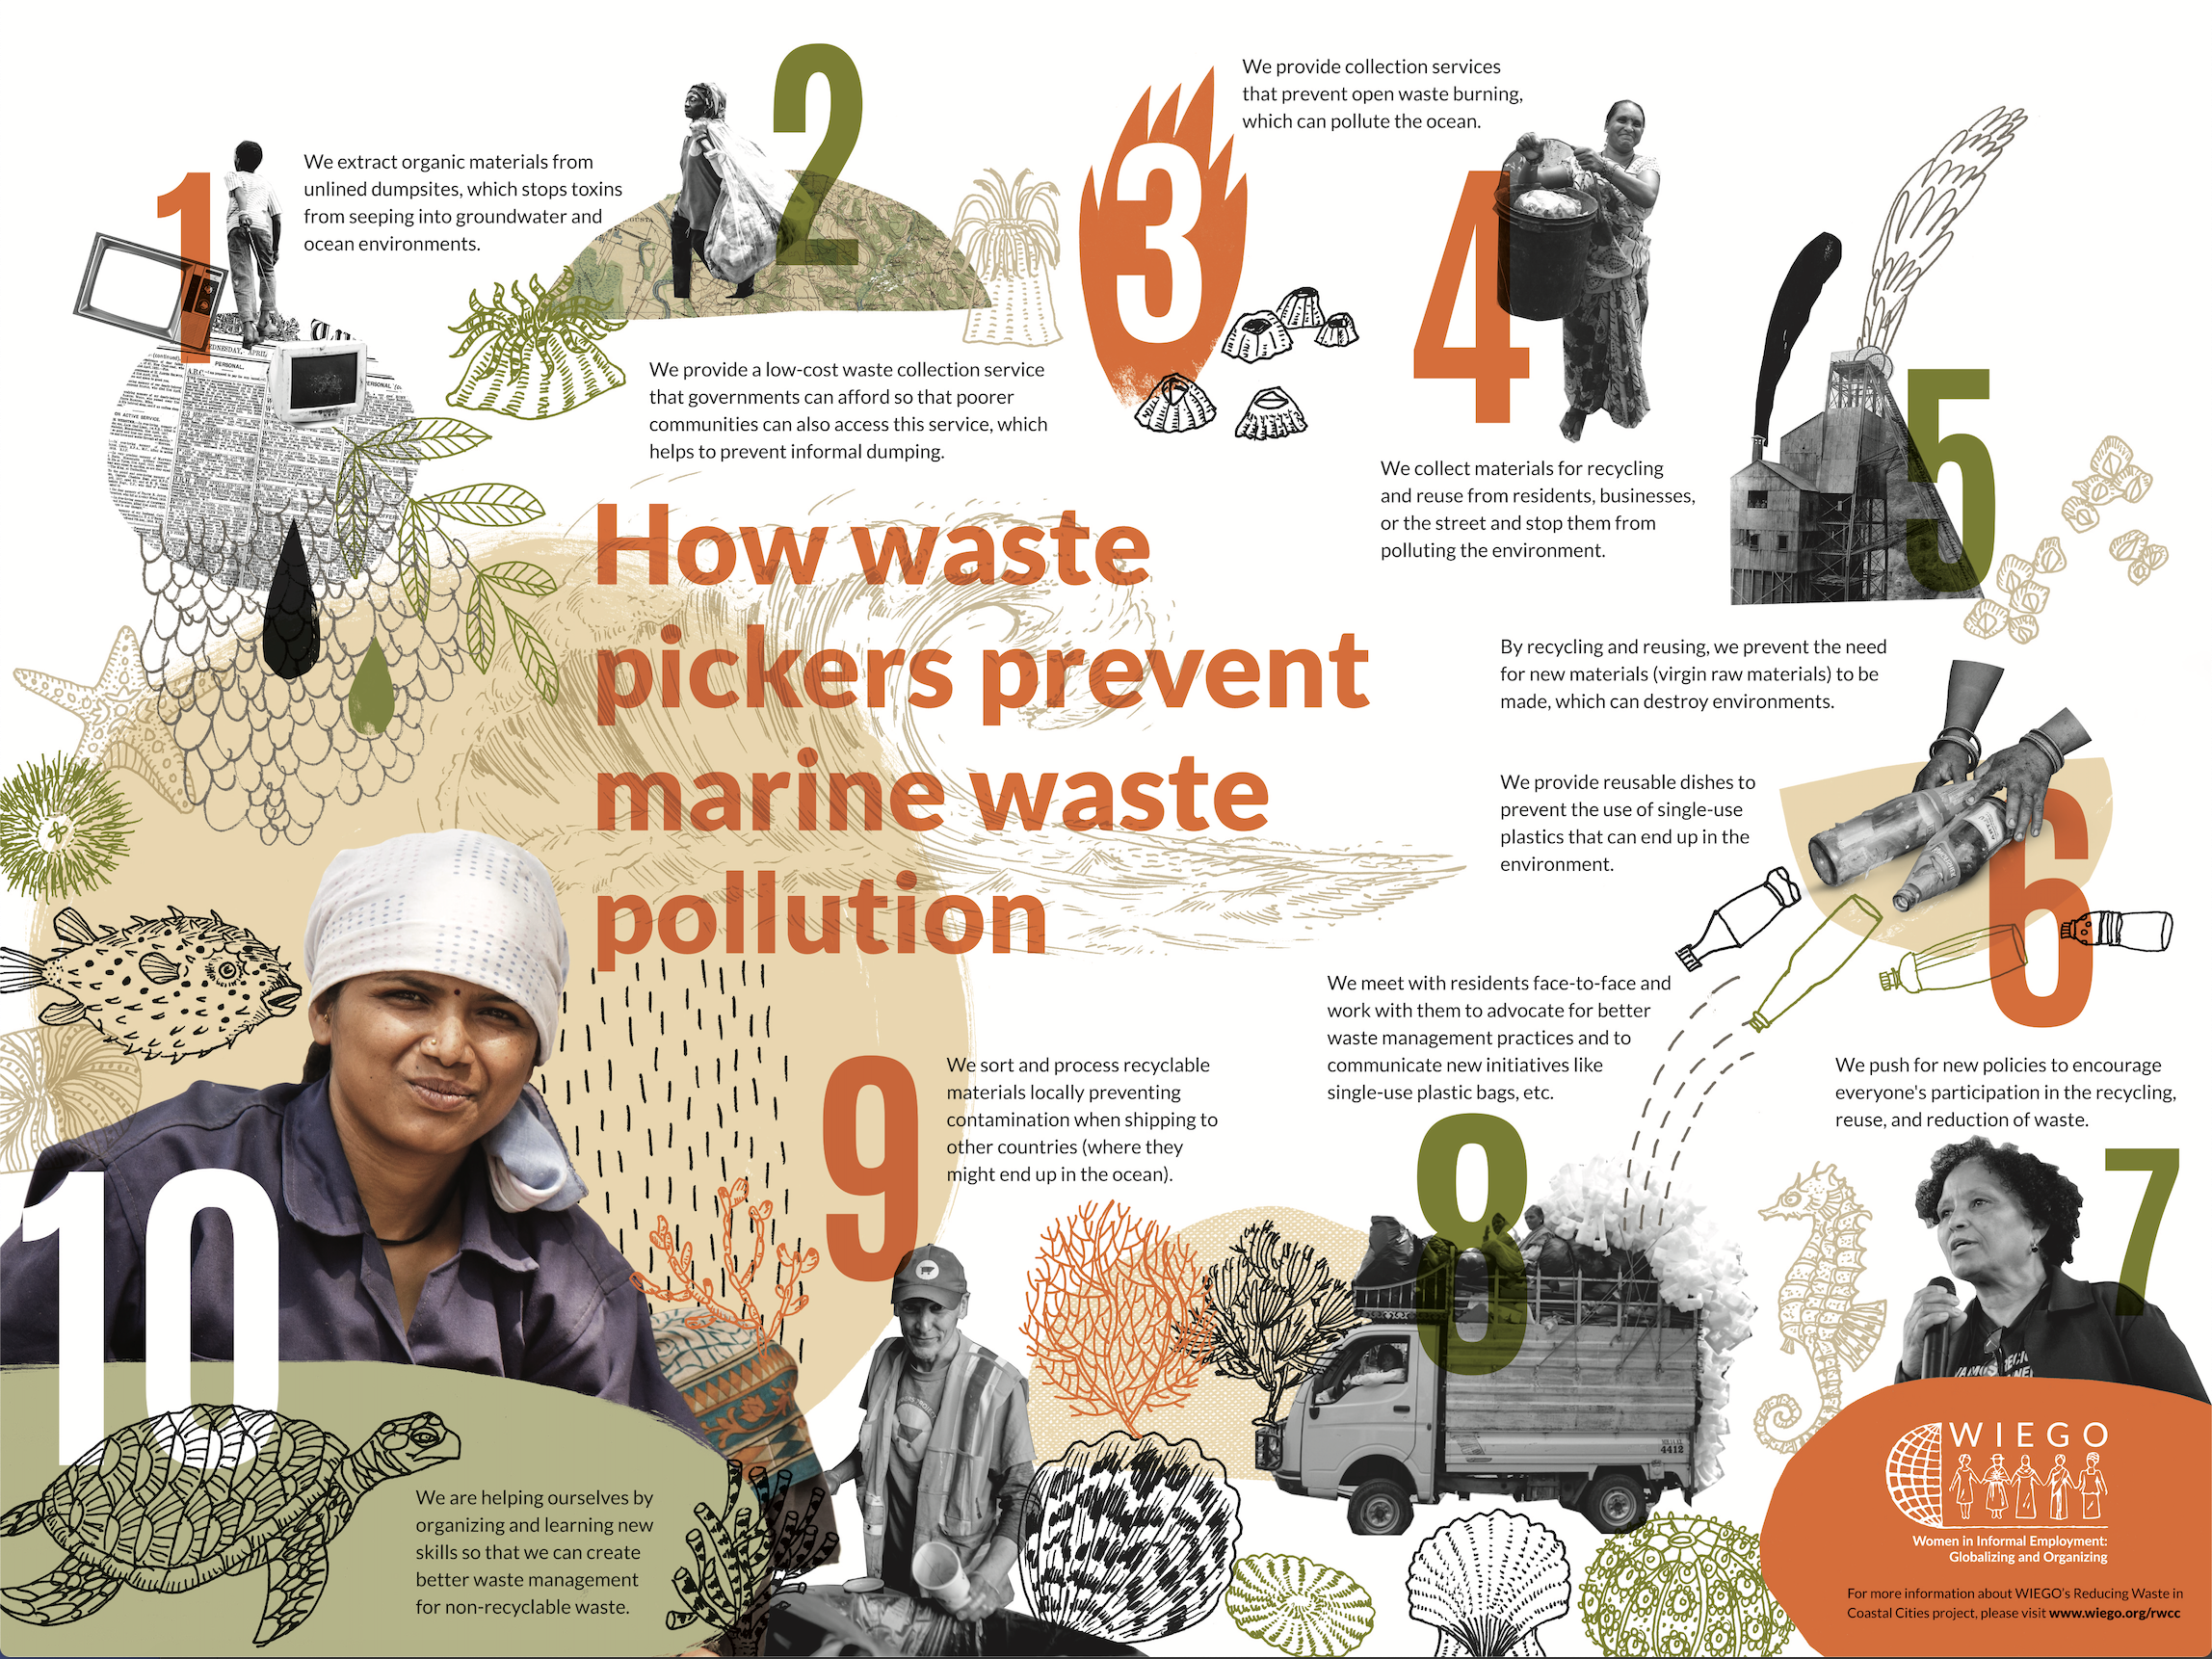 How waste pickers prevent marine waste pollution